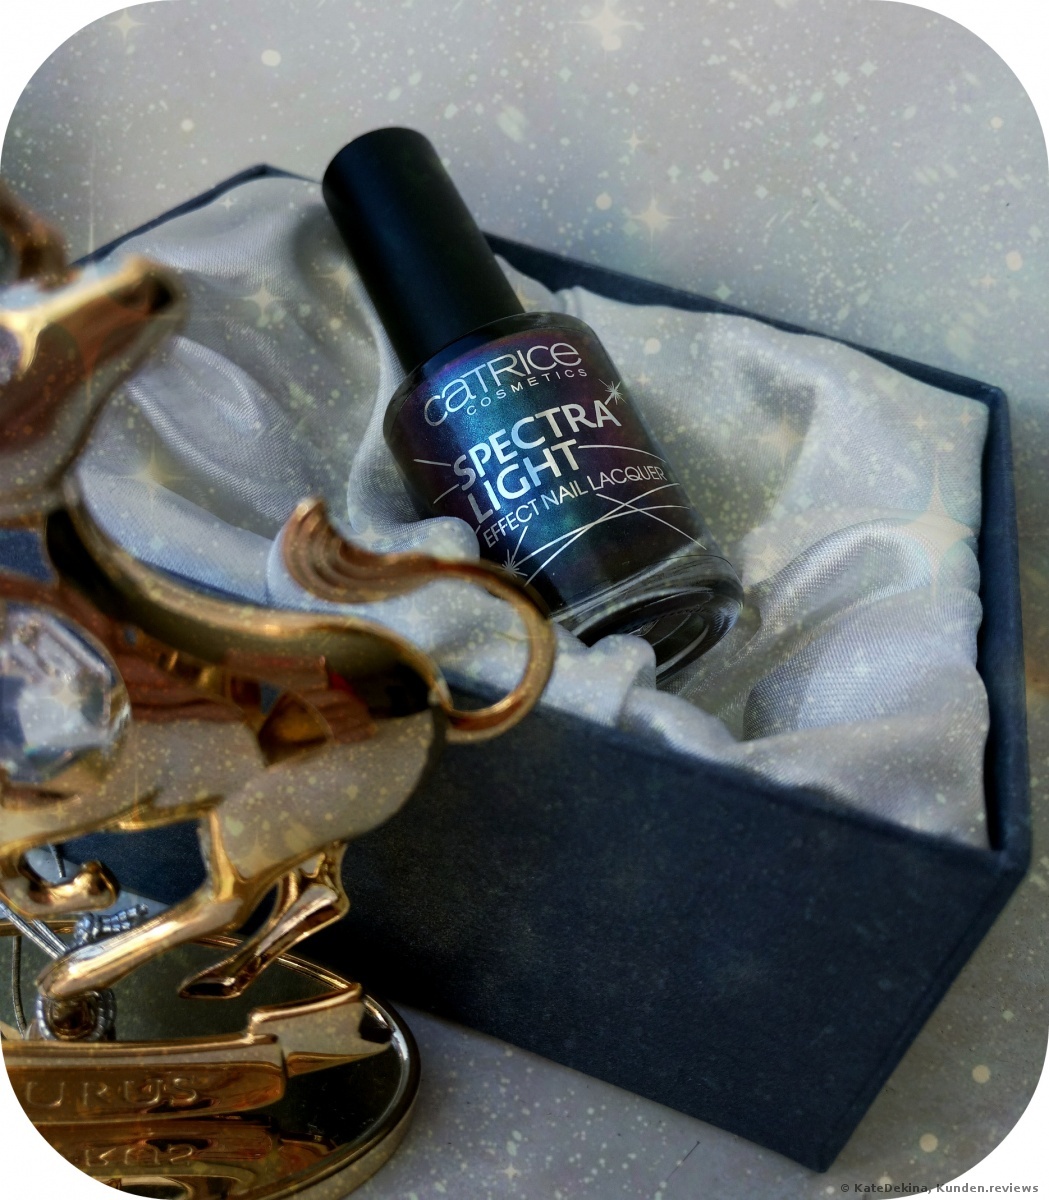 CATRICE SPECTRA LIGHT EFFECT NAIL LACQUER